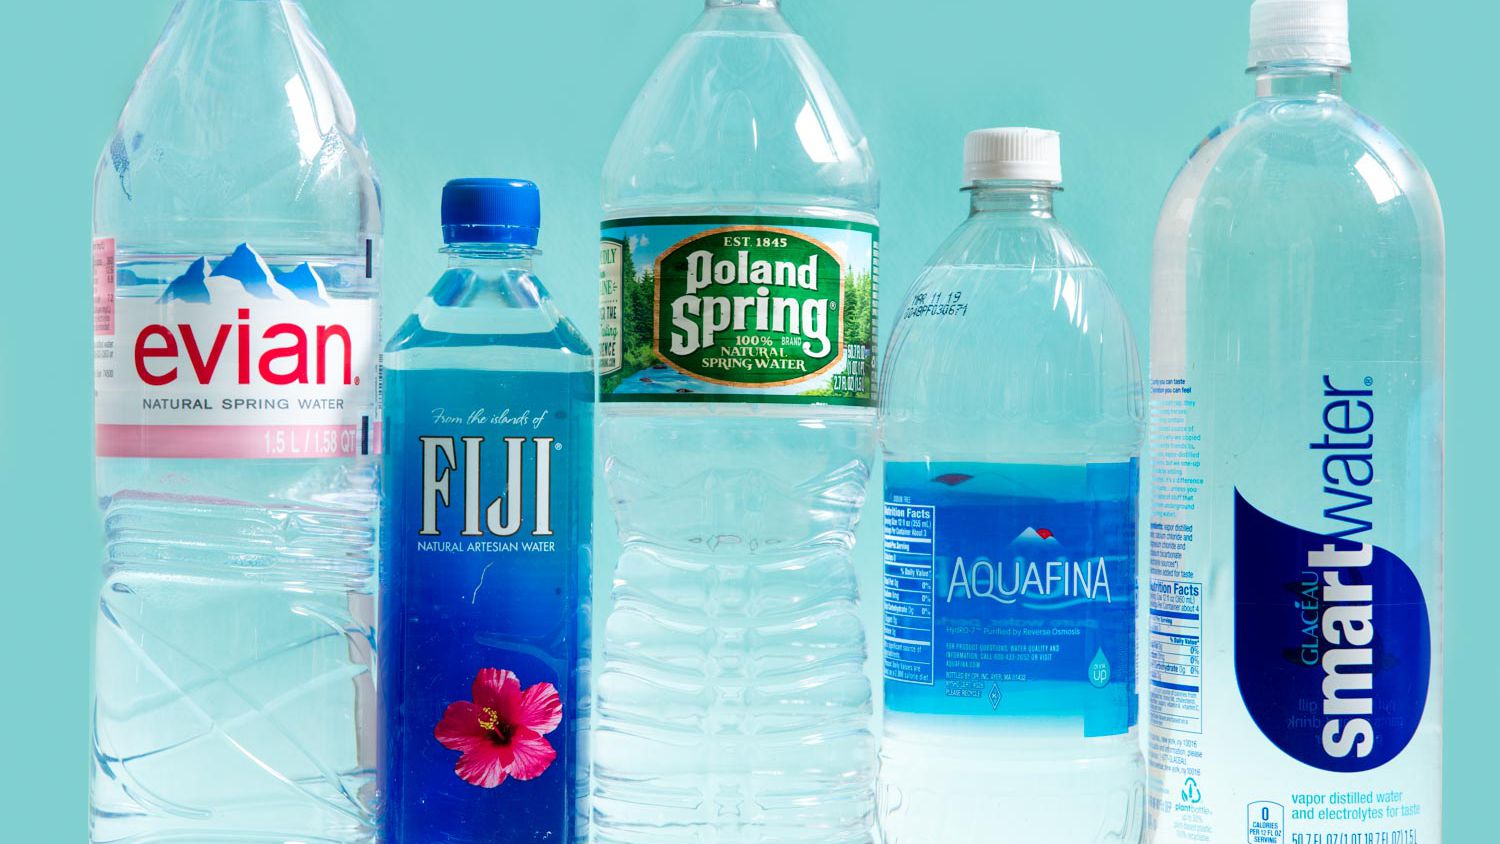 bottled water - Est. 1845 Uly Poland 19 9430677 evian 100% Brand Natural Spring Water Natural Spring Water From the islands of 1.5 L 158 Q71 Fiji Facts le thread Natural Artesian Water Aquafina smartwater Urtion Facts Glacau Purby Reverse Osmosis C. Ud Do